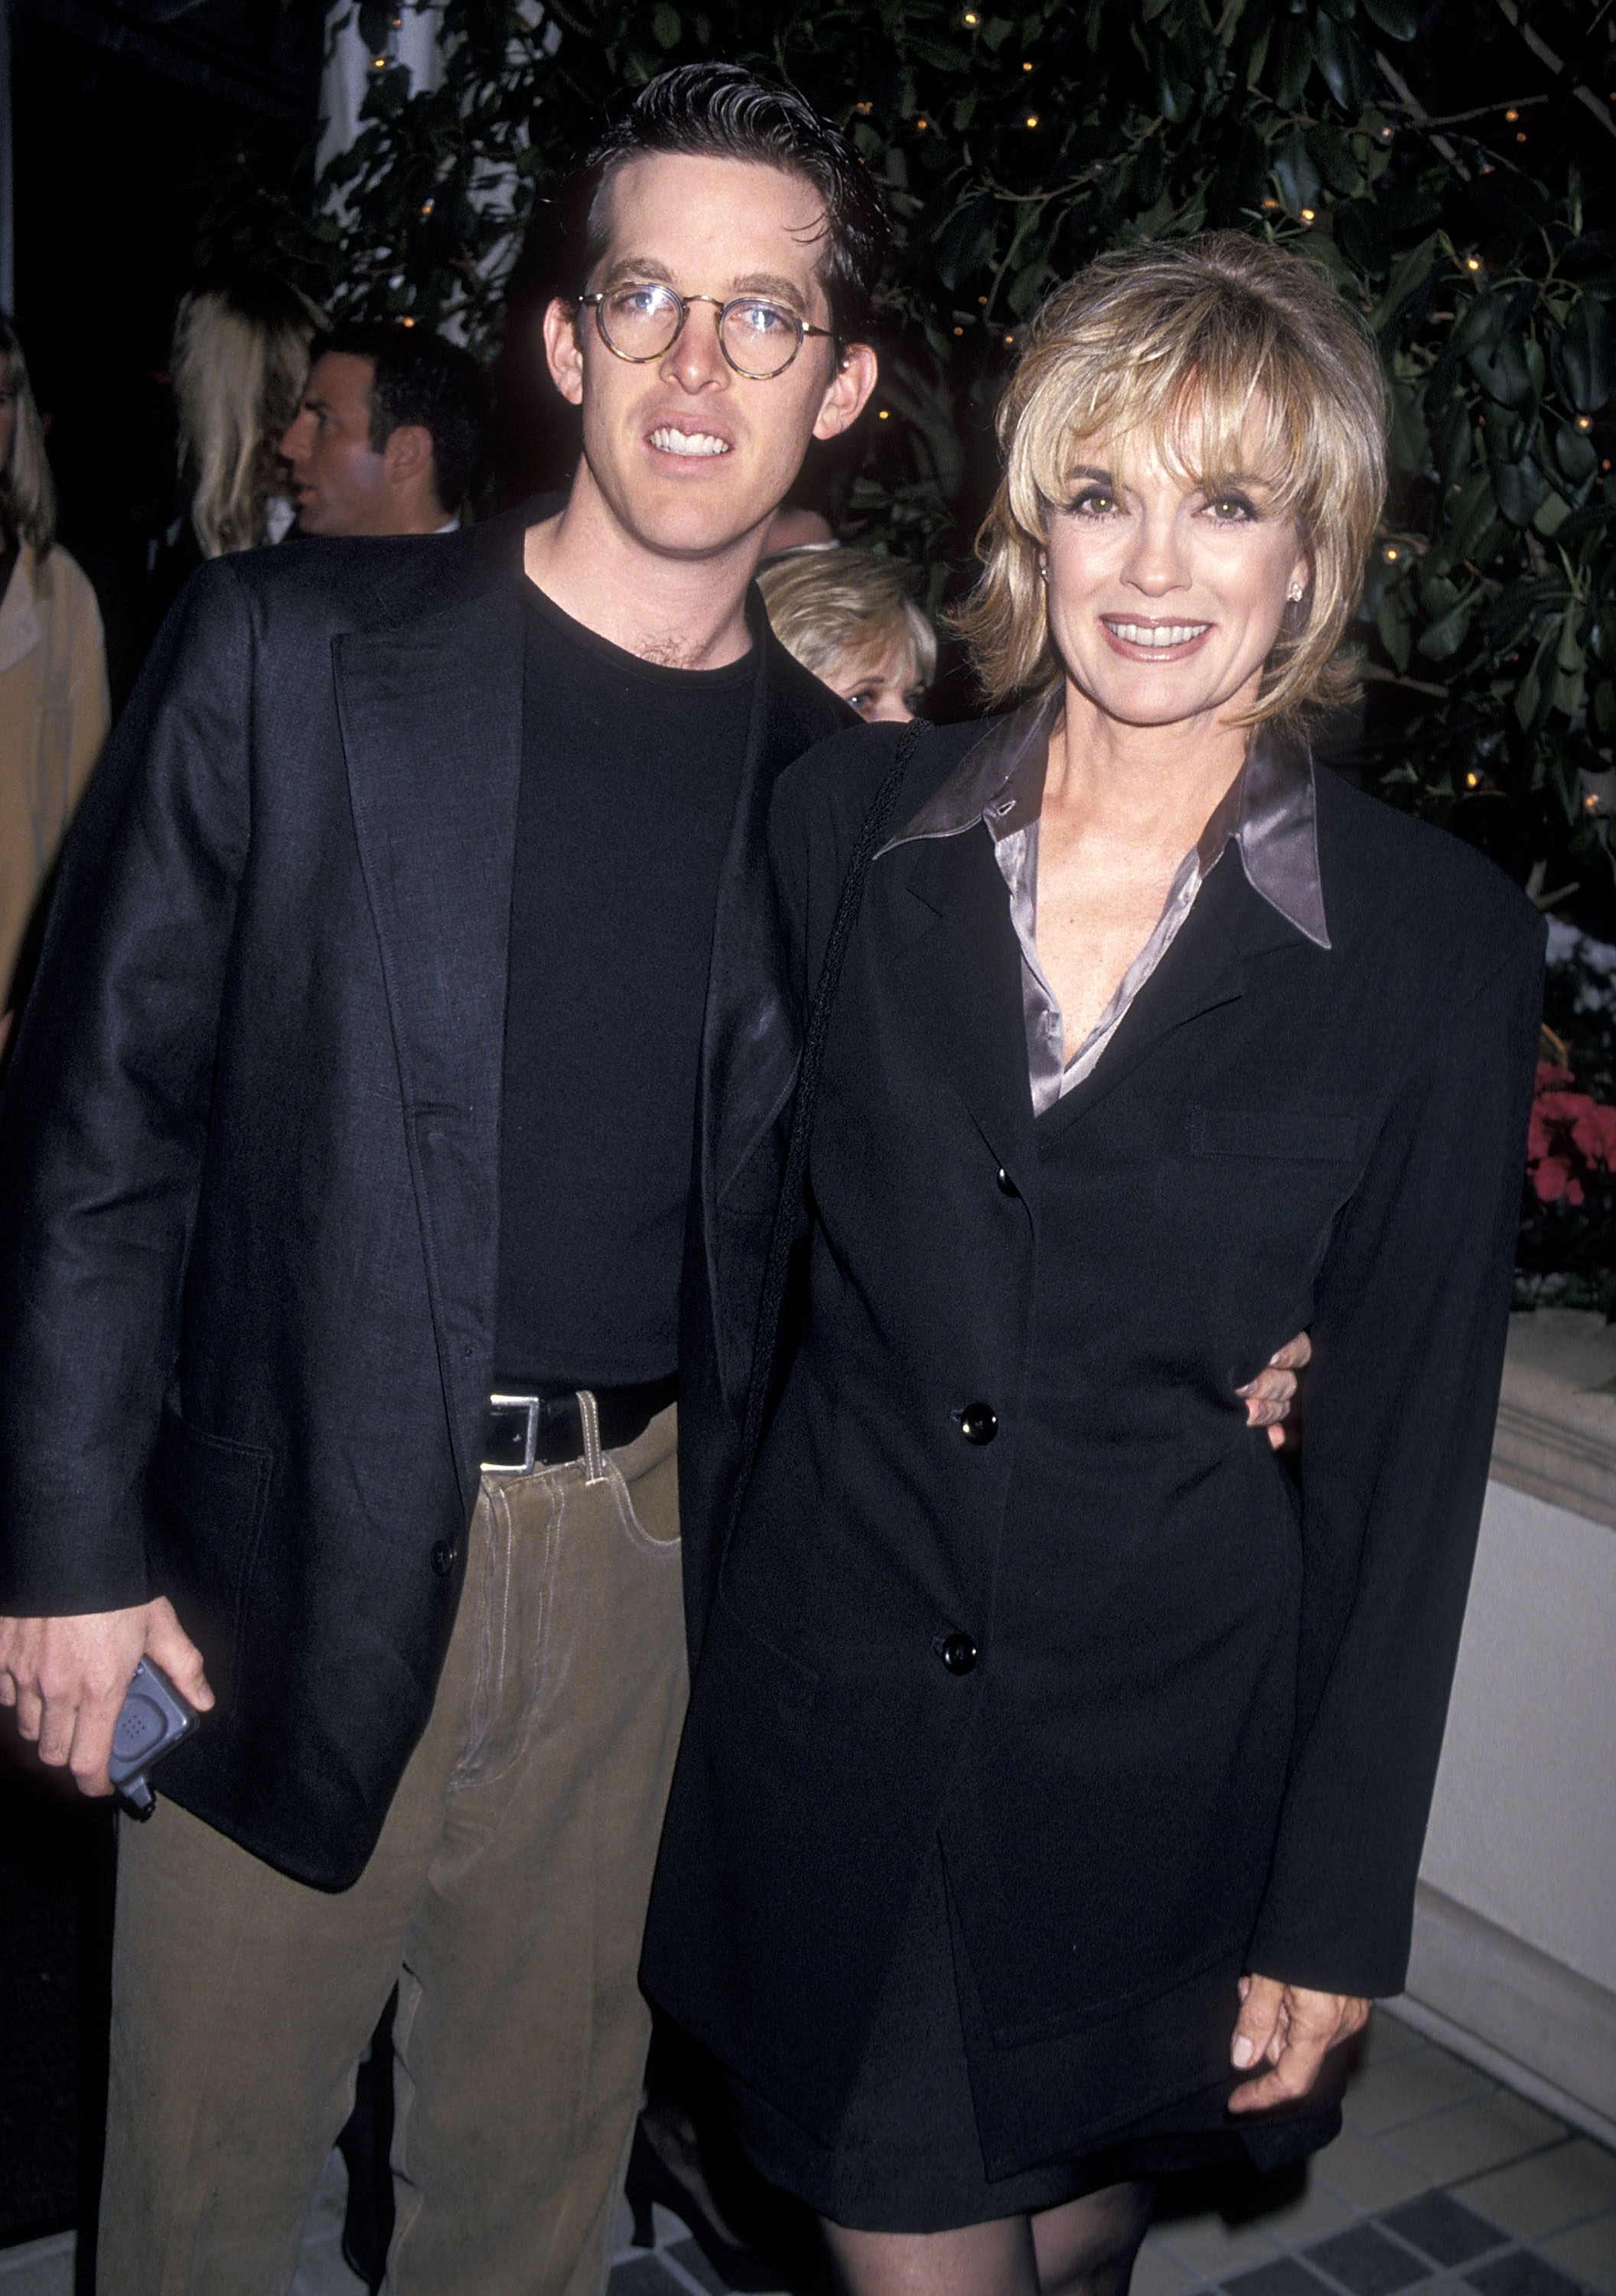 <p>On Nov. 23, 2020, "Dallas" actress Linda Gray revealed in a heartbreaking Instagram post that her son, TV director and producer Jeff Thrasher — who'd worked on shows including "The Amazing Race Canada" and "Junior Chef Showdown" — had died. "A celebration of my son Jeff's life. He was the kindest, funniest, sweetest human being….. he brought the world such love and was loved by everyone! May his journey be a magical one," she captioned a <a href="https://www.instagram.com/p/CH8vEF6rFYf/">slideshow</a> of photos showing Jeff, who was in his 50s, riding a bike and his name written in the sand on a beach. Jeff's dad was Linda's former husband, the late art director and album cover designer Ed Thrasher. </p>